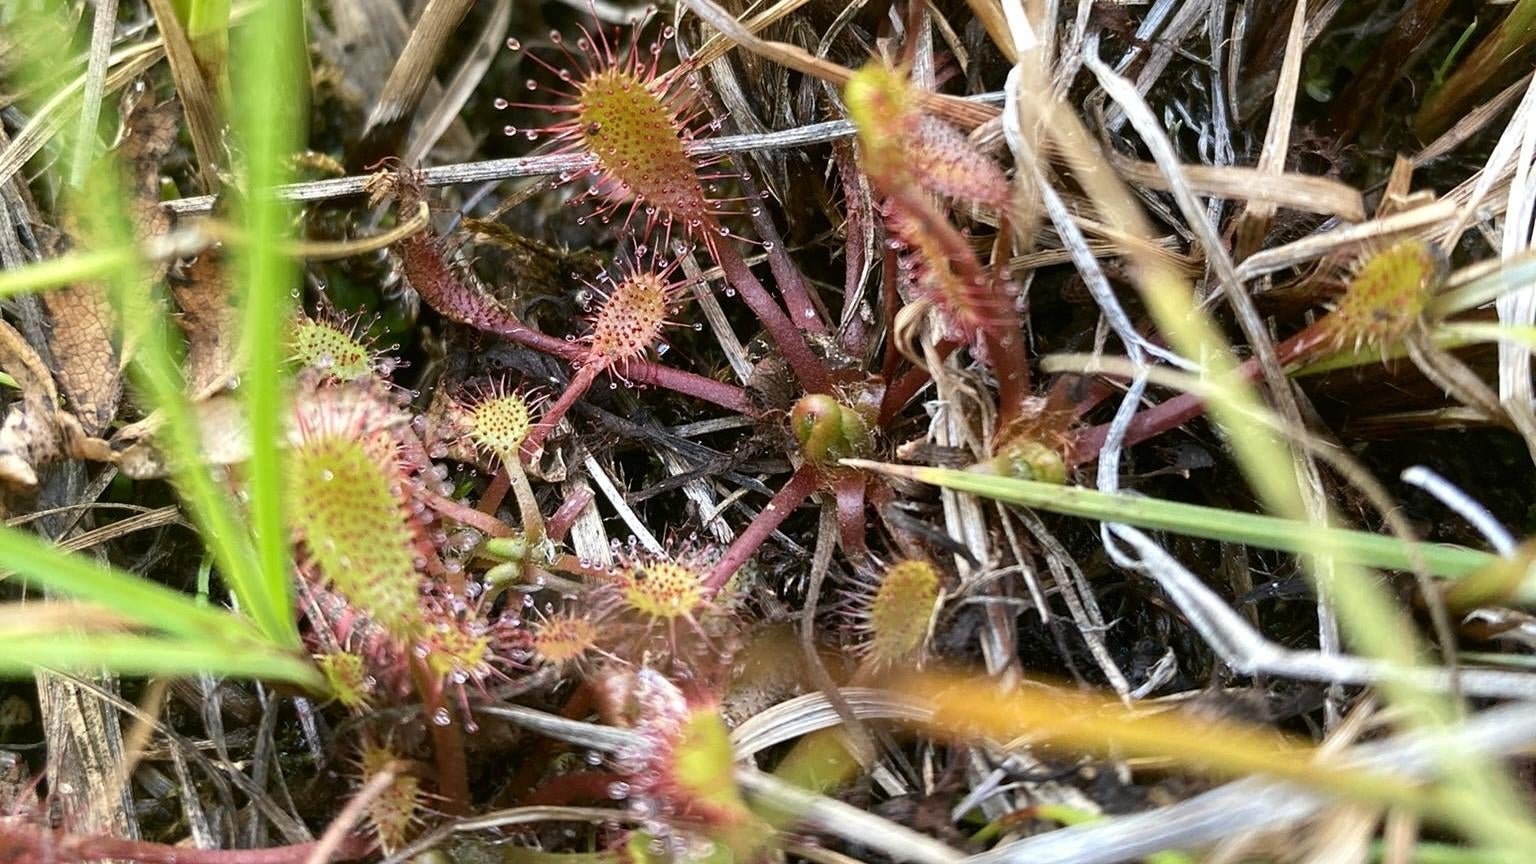 Carnivorous plants like this sundew are found on every continent except Antarctica, but they only grow in very specific habitats. (Photo: Lauren Leffer / Gizmodo)